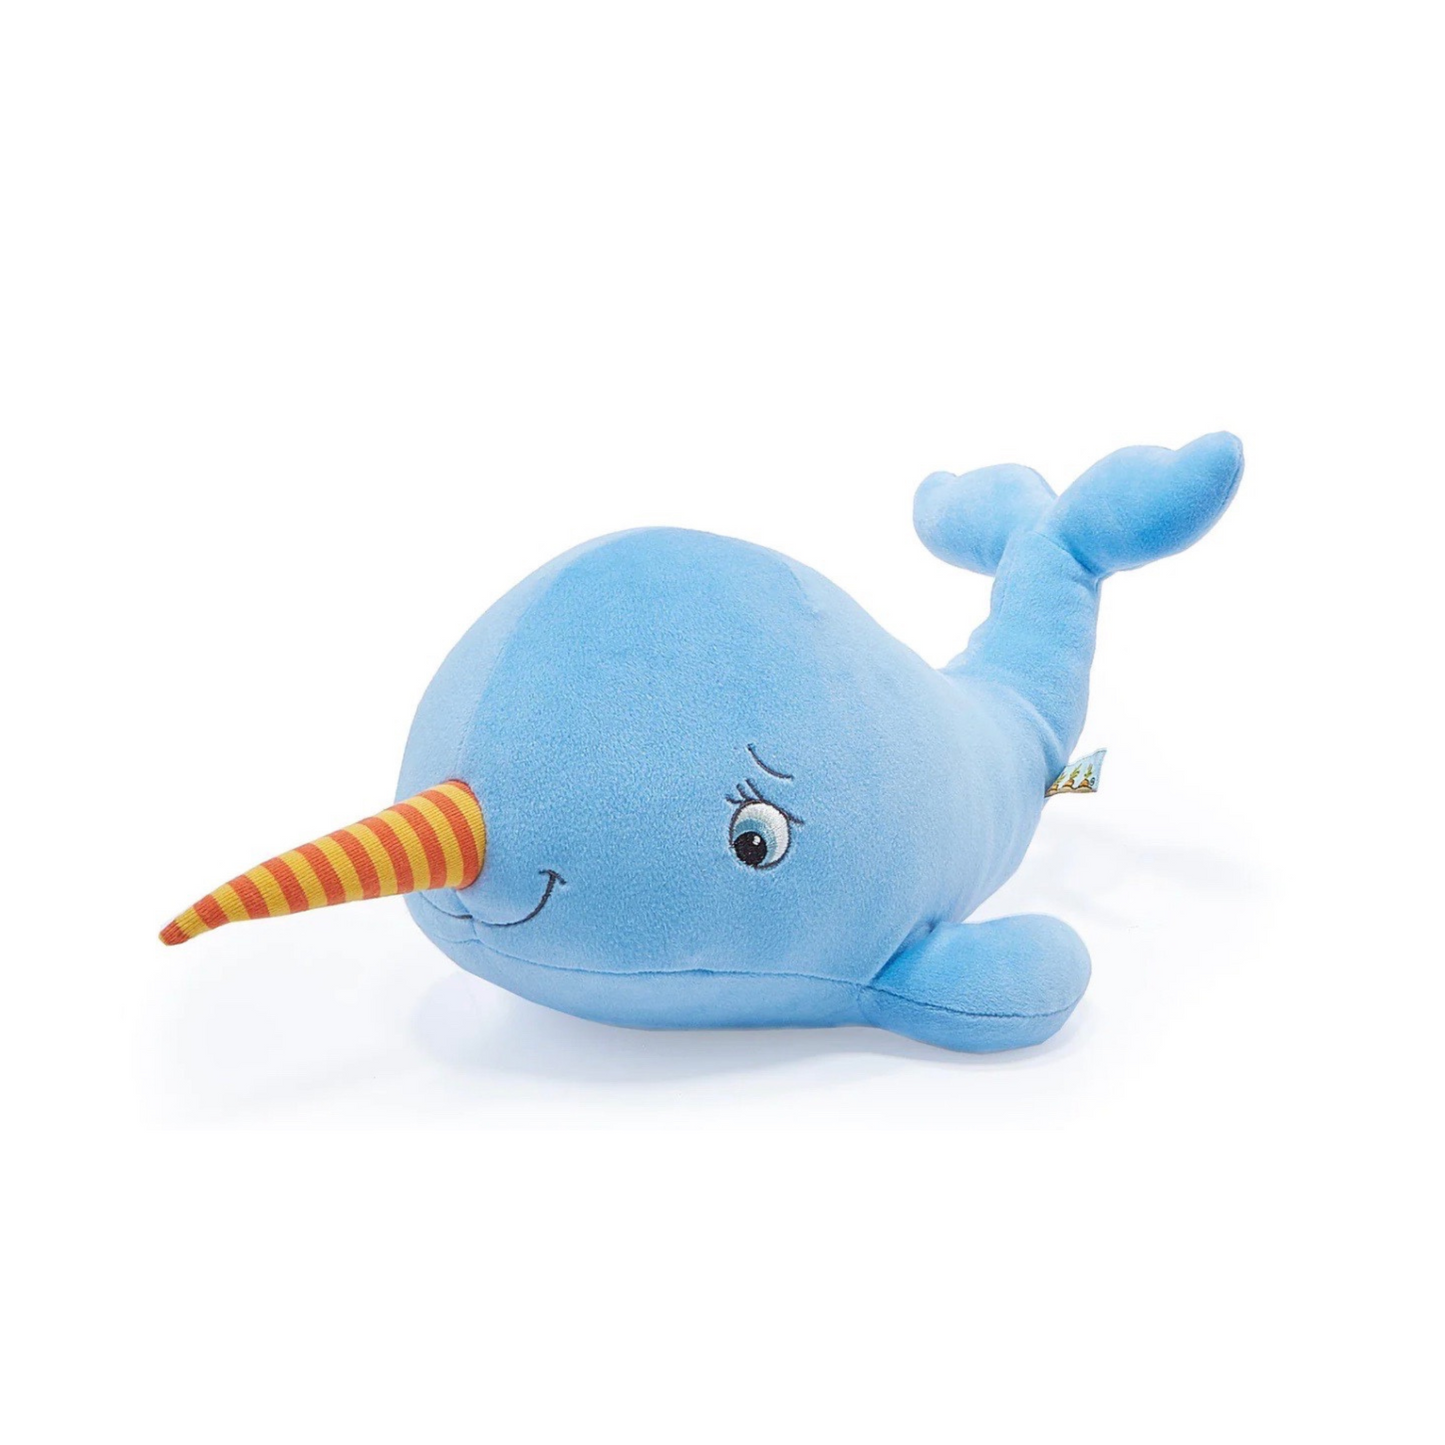 Wally Narwhal Blue Plush Whale